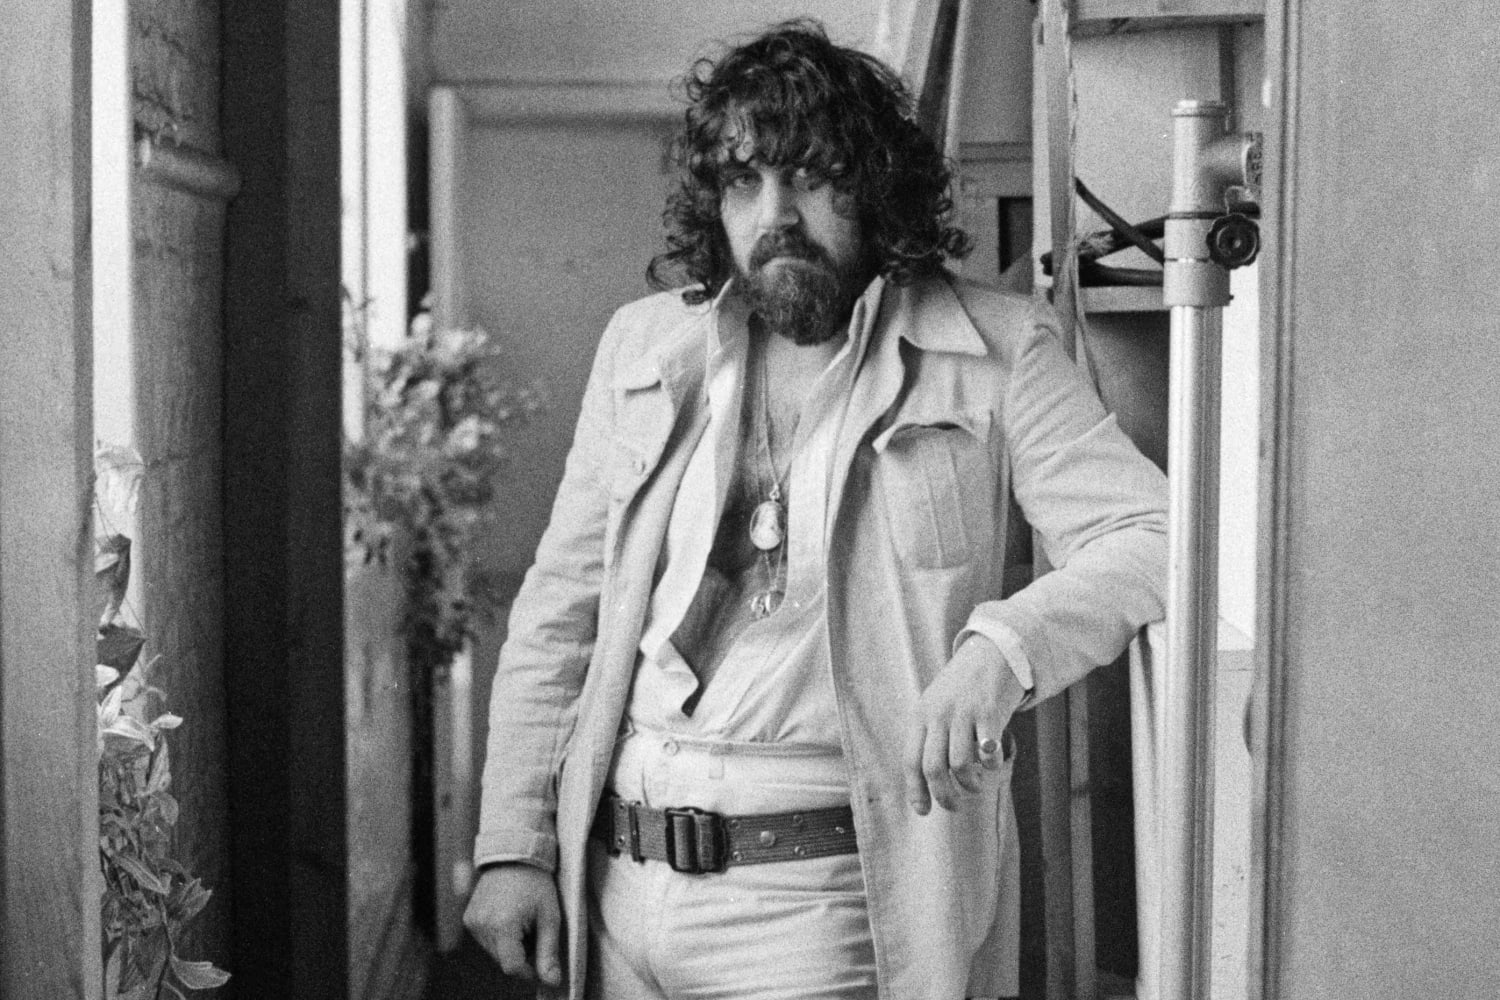 Vangelis, Oscar-winning composer of 'Chariots of Fire' and 'Blade Runner,' dies at 79